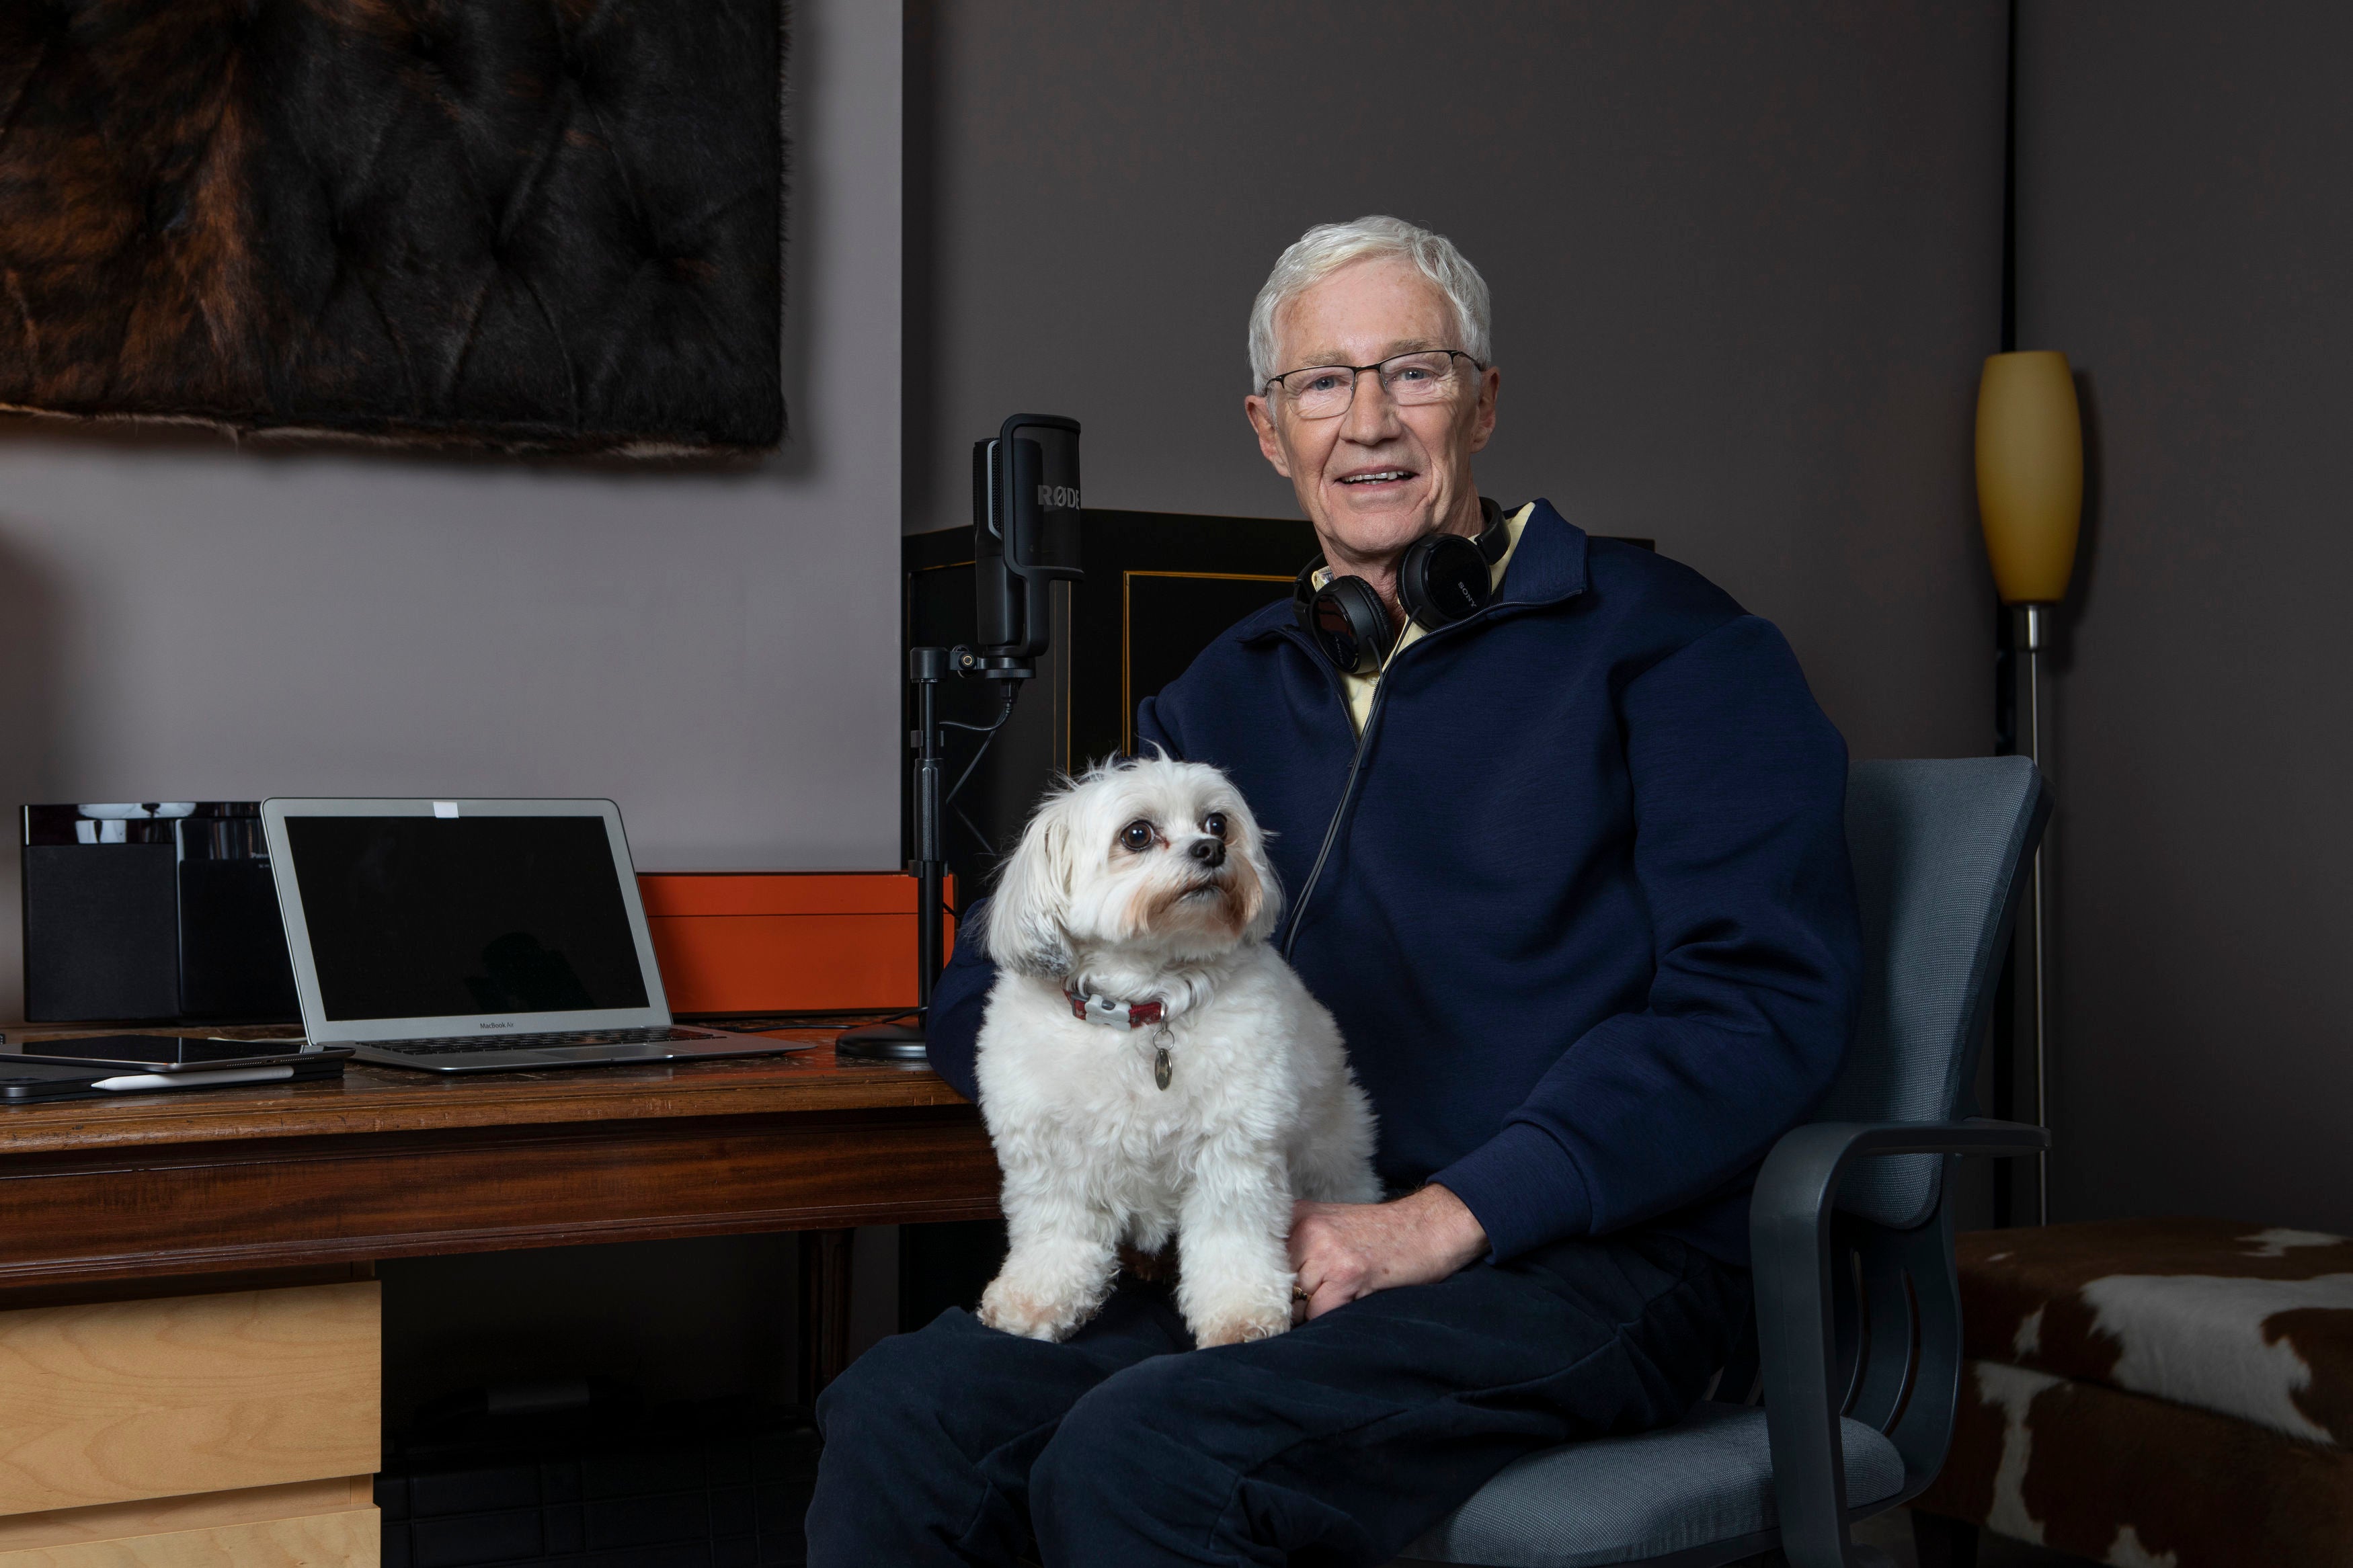 Photo issued by Boom Radio of Paul O’Grady and his dog Conchita